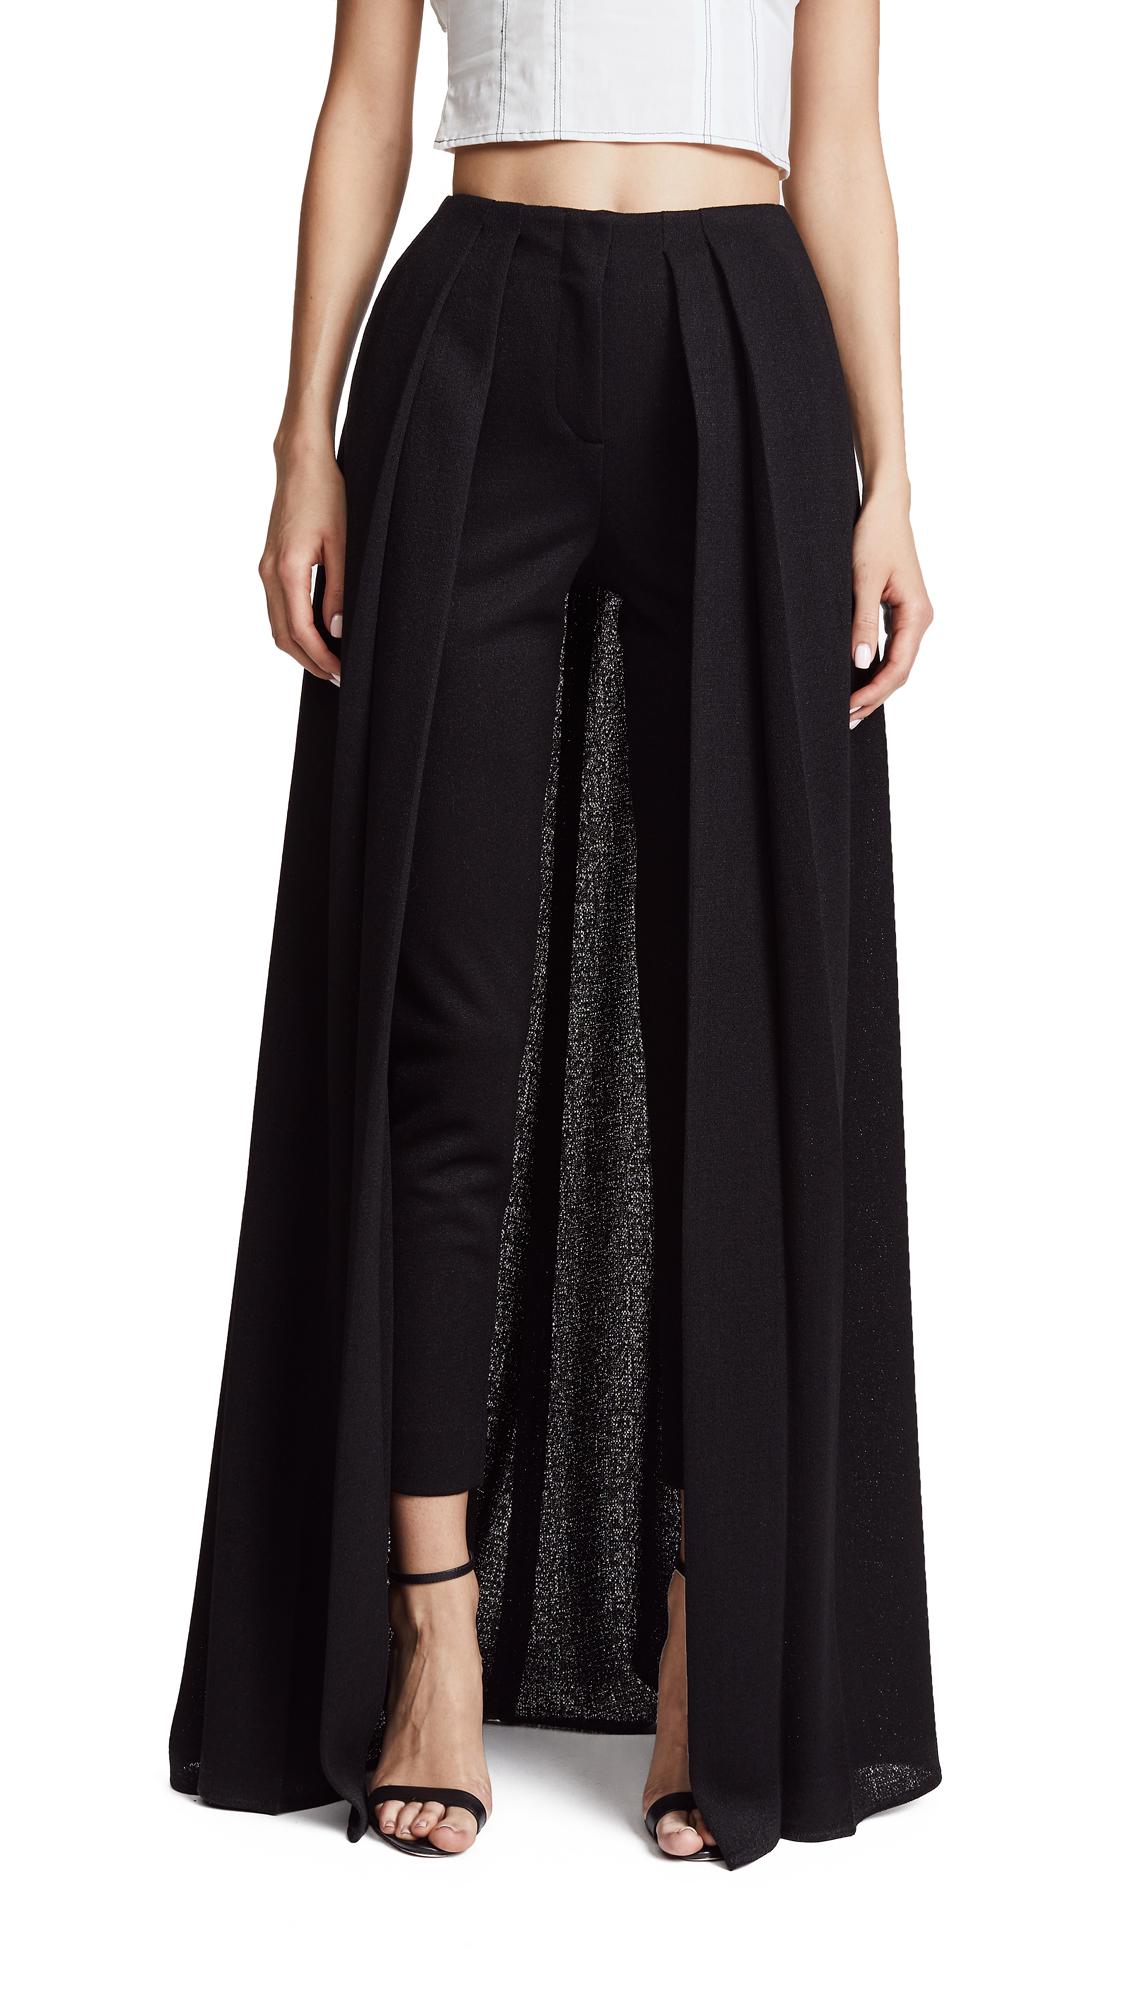 Hellessy Synthetic River Slim Pants With Skirt Overlay in Black - Lyst